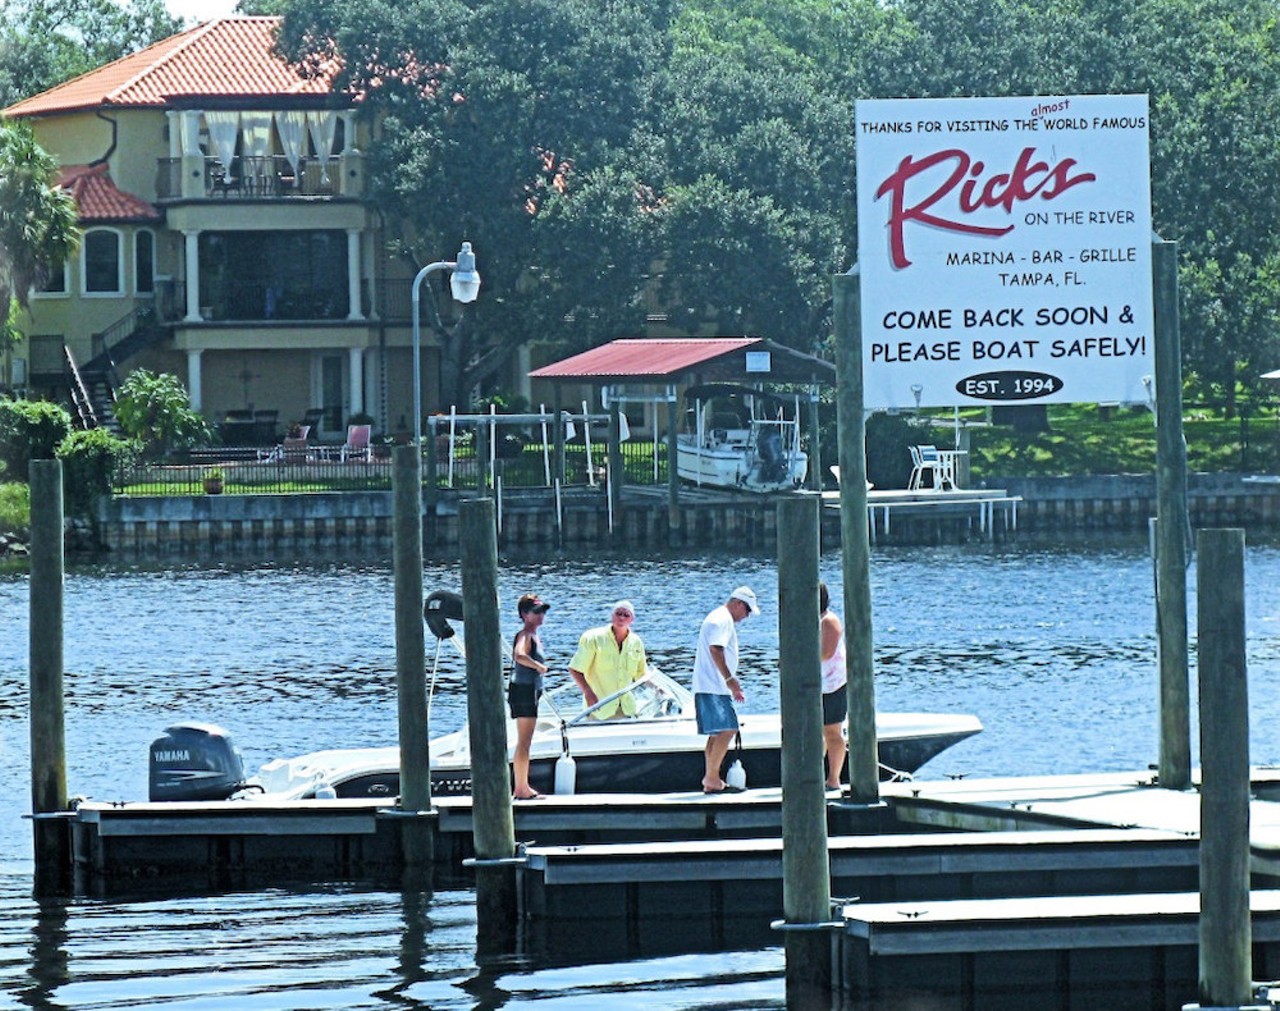 Rick’s on the River
What to get: A cold beer and a cover band
2305 N Willow Ave., Tampa, 813-251-0369
Whether you pull in by boat or car, this no frills waterfront staple on the Hillsborough River is the perfect place for you and the gang share a pitcher, and grab a tray of oysters, or just take in some local cover band since the bar has live music daily. 
Photo via Rick’s on the River website